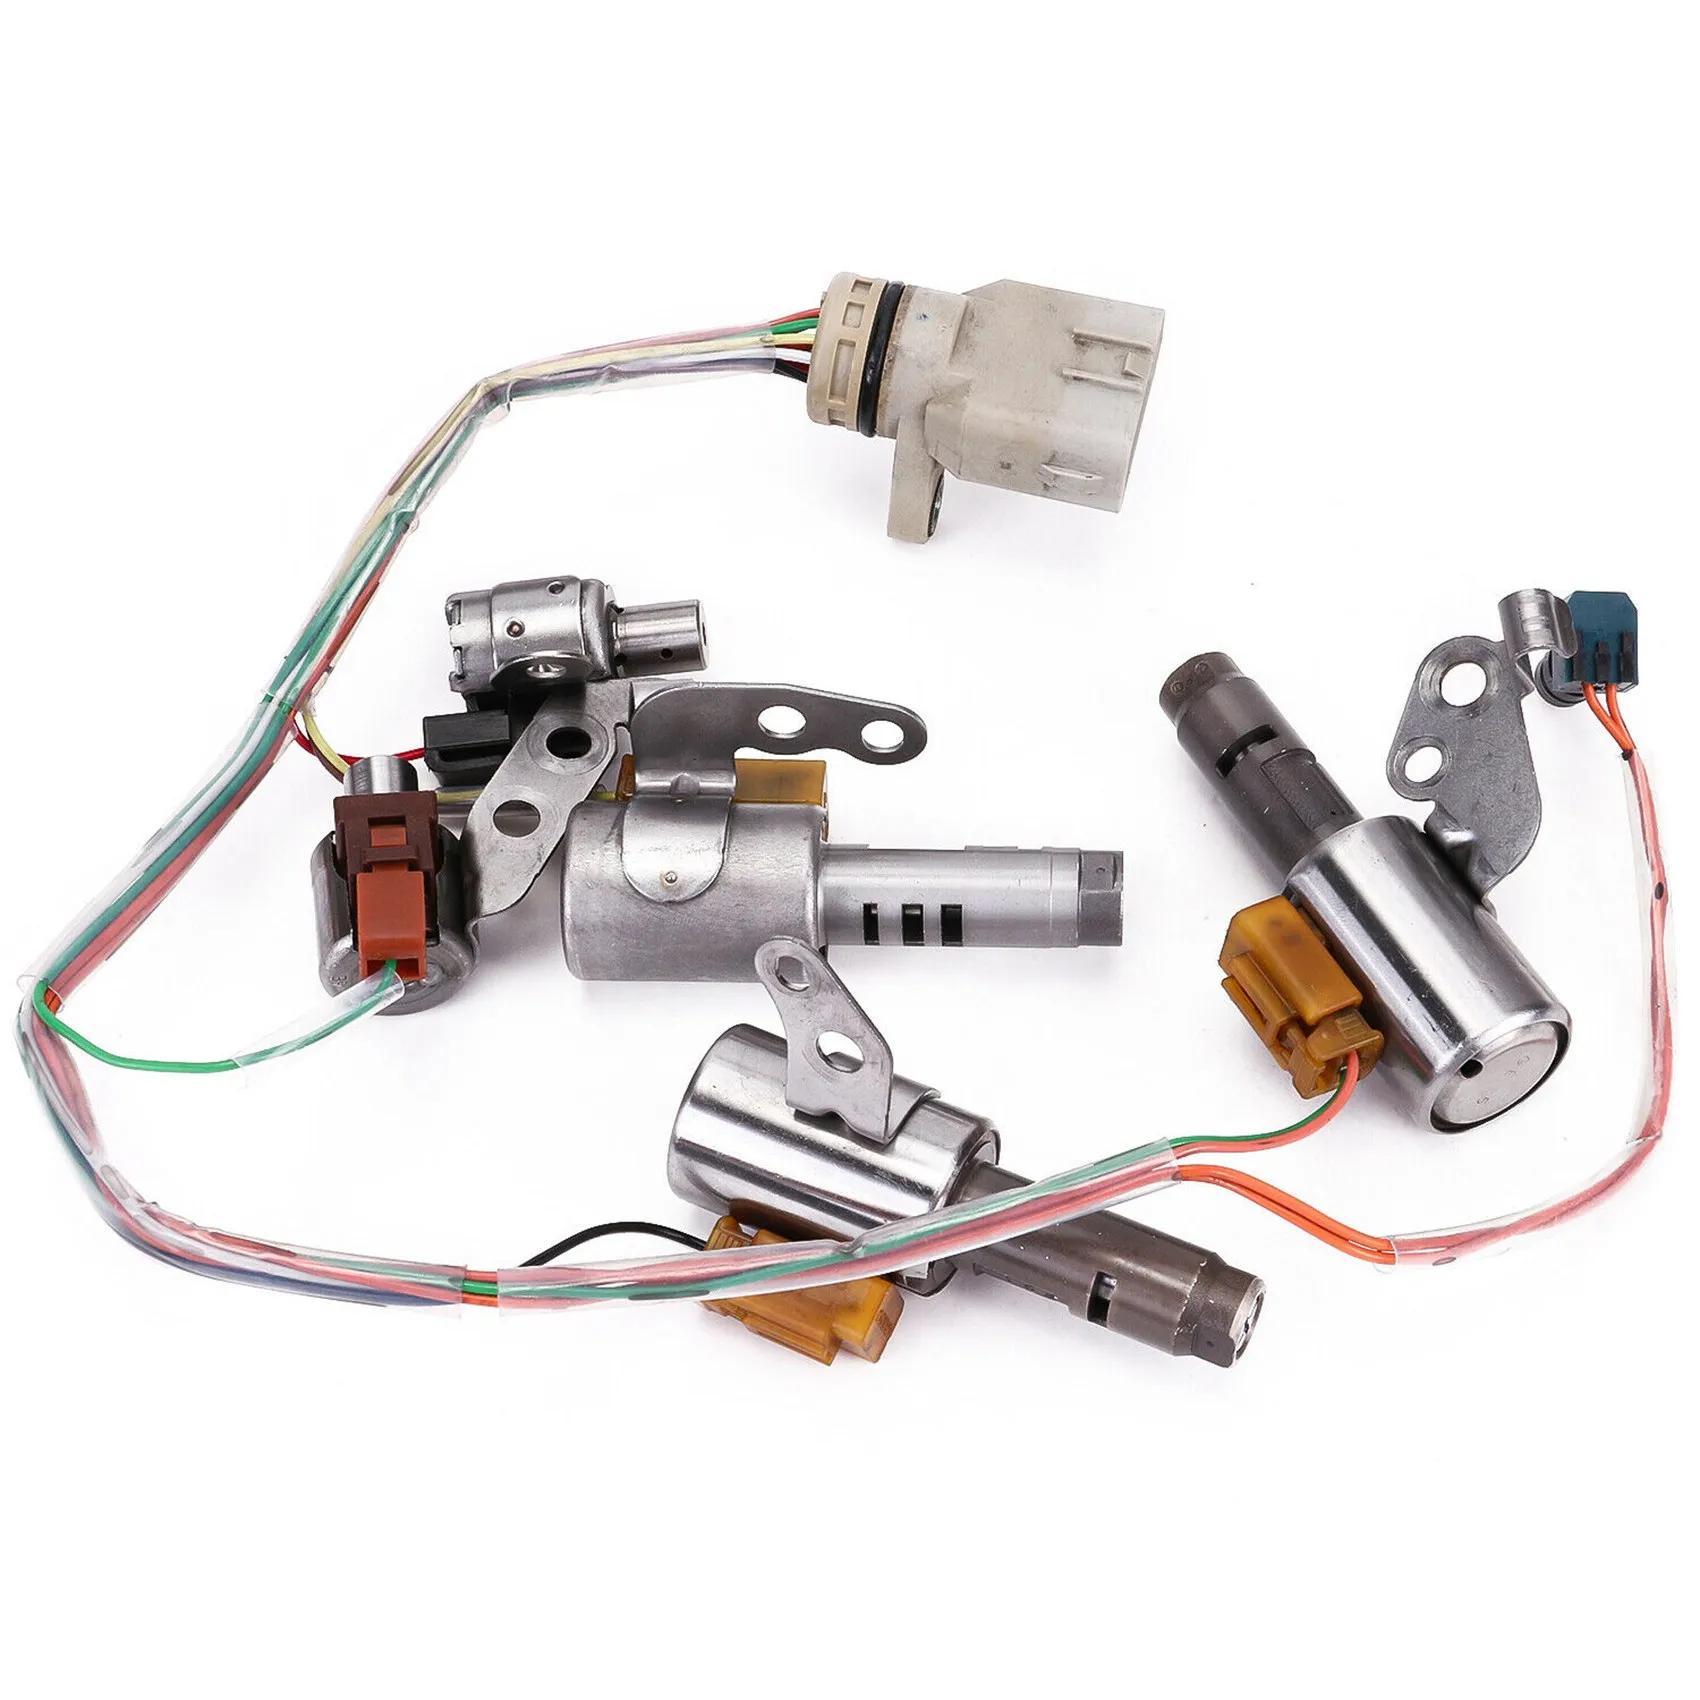 

Transmission Solenoid Kit with Harness for Toyota / Lexus U140E/F5 656-3181